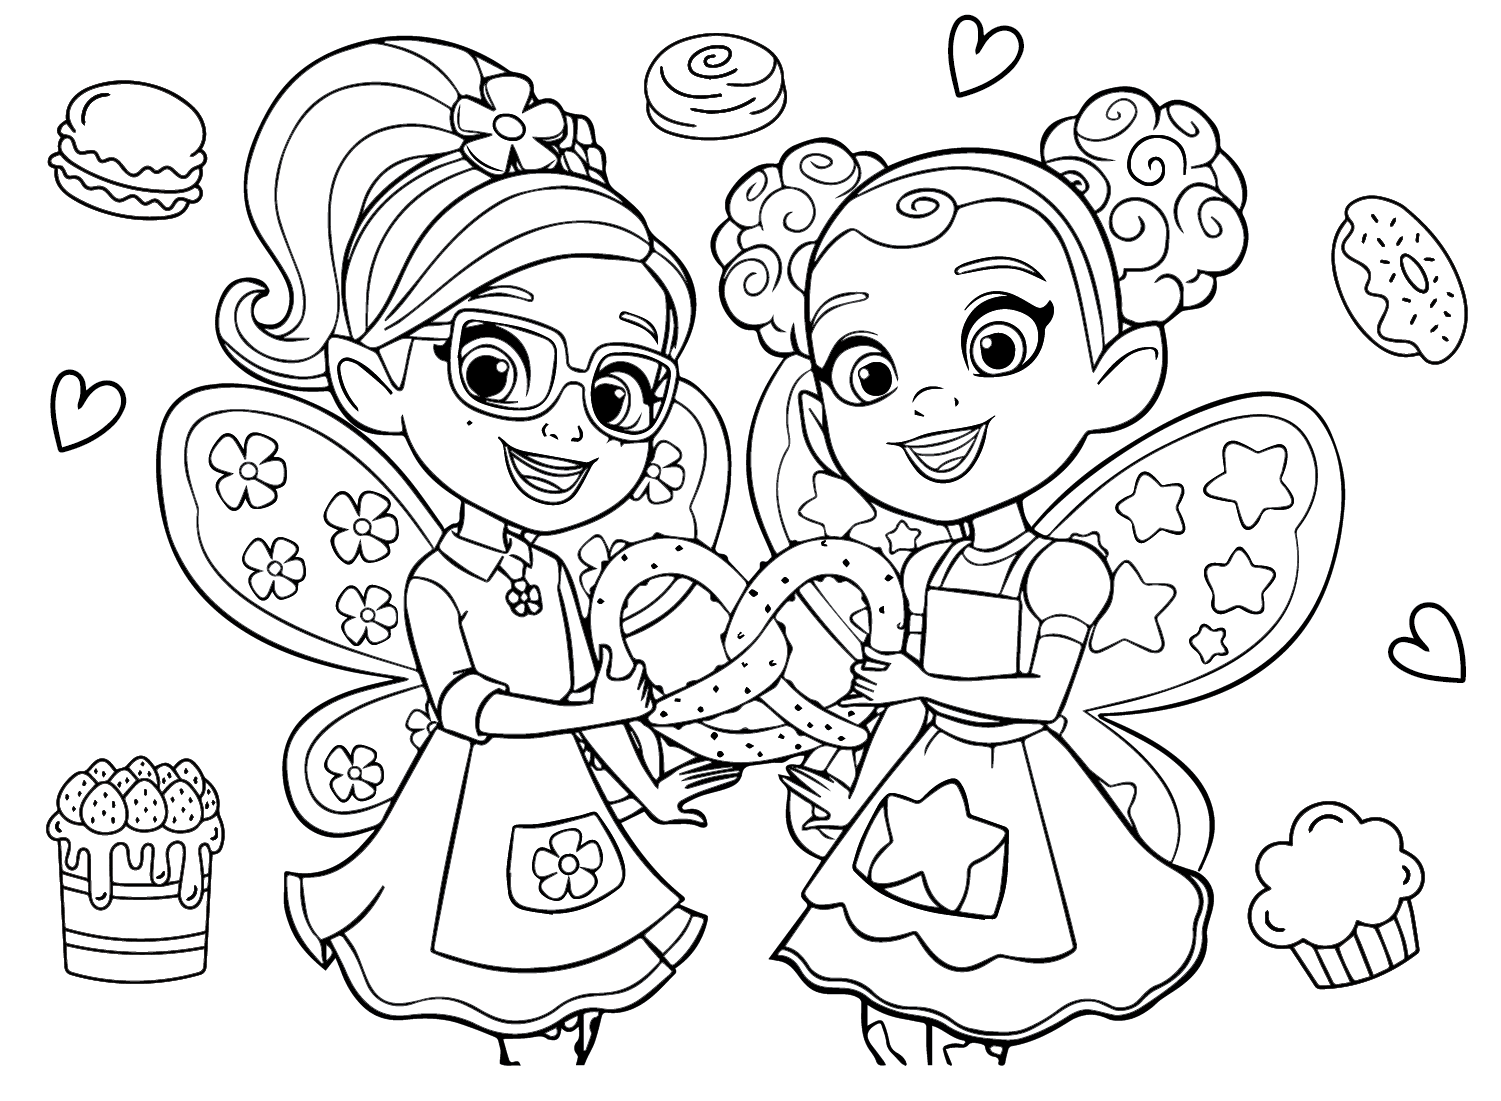 Dazzle And Poppy Coloring Page - Free Printable Coloring Pages